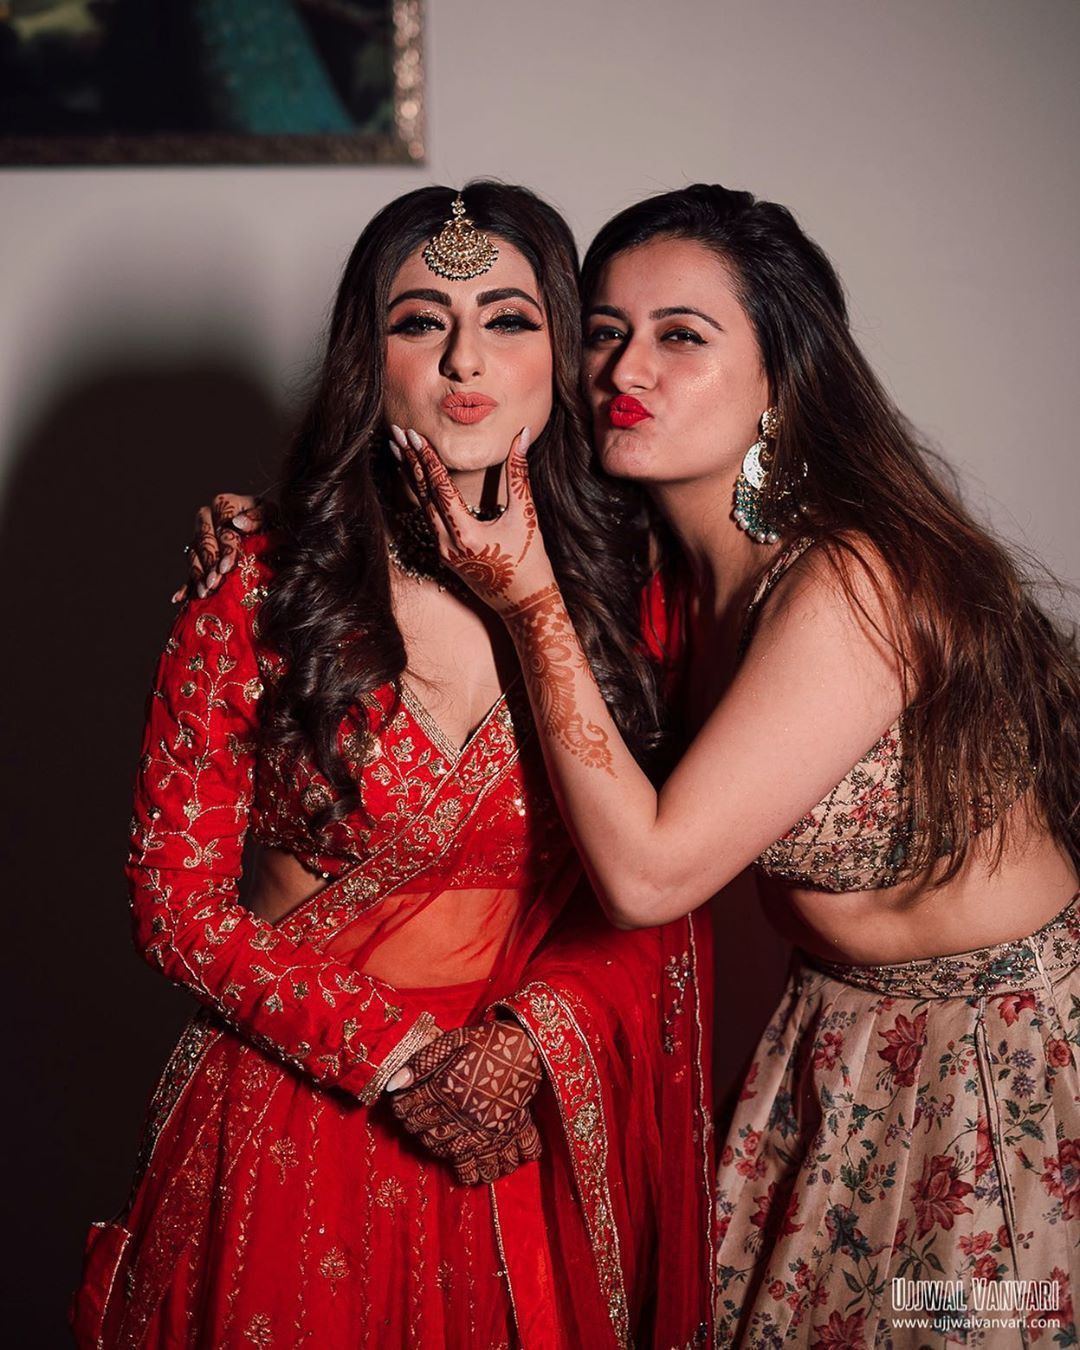 Yaari Dosti Shaadi - Wedding pictures you MUST take with friends! |  Bridesmaid photoshoot, Indian bride photography poses, Indian wedding  photography poses